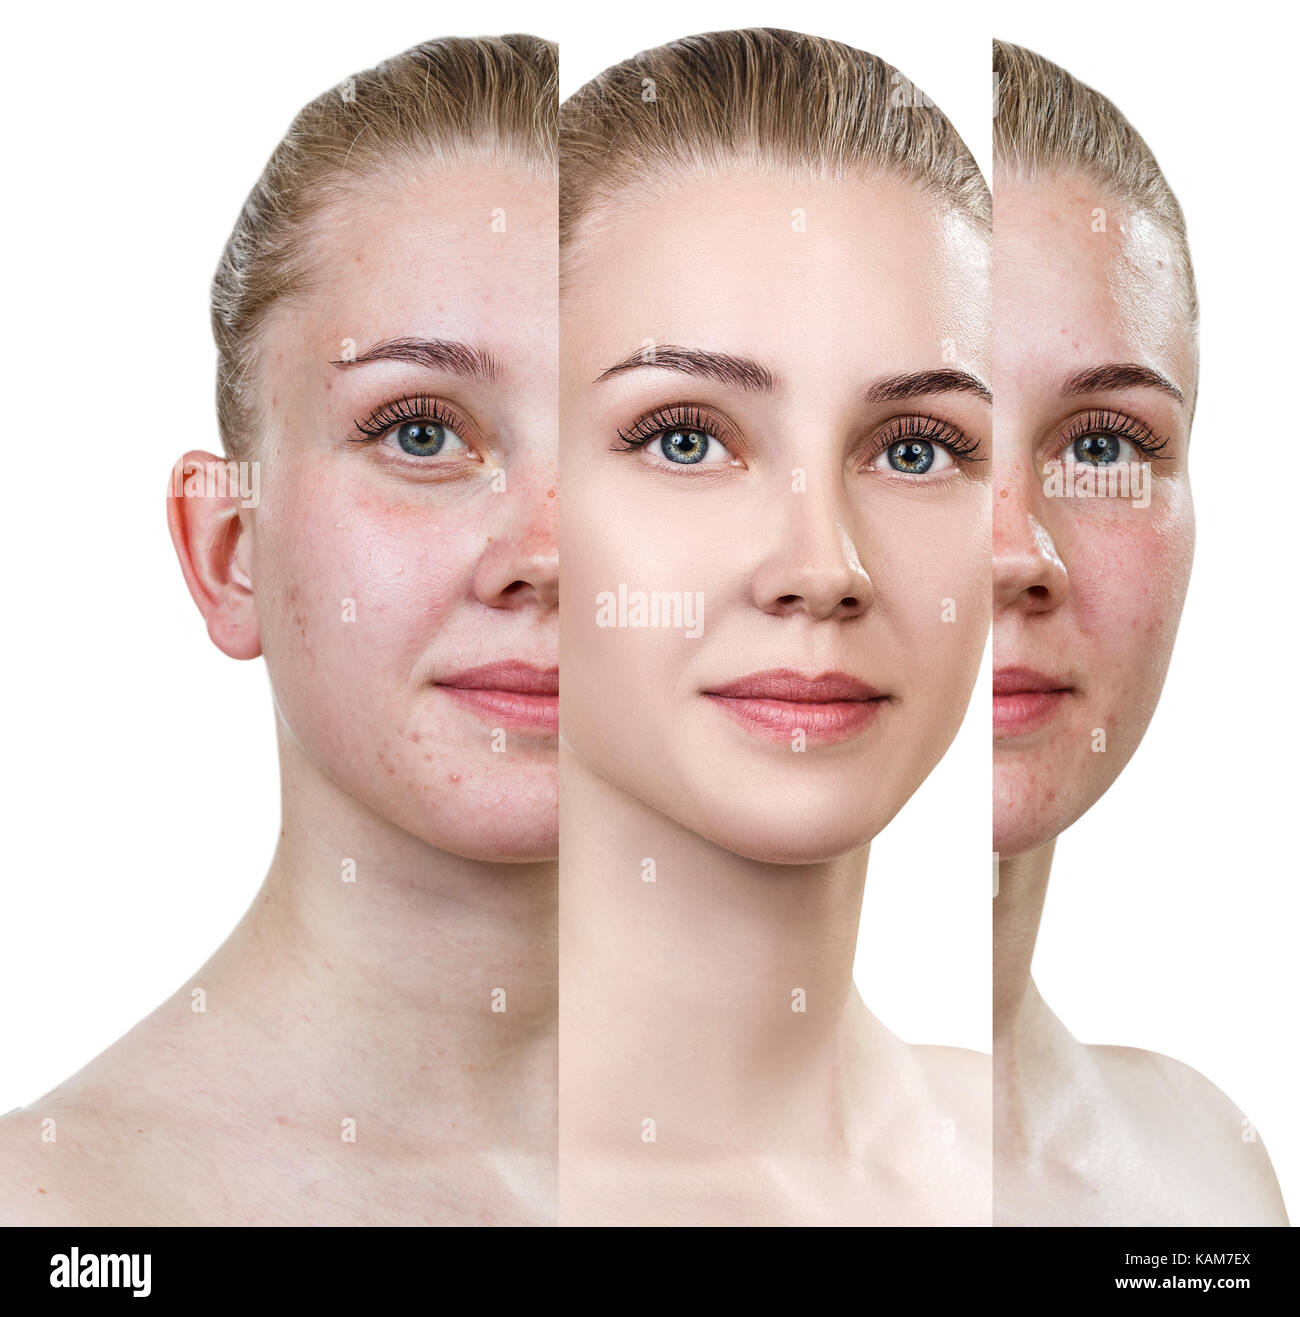 Woman with problem skin. Stock Photo